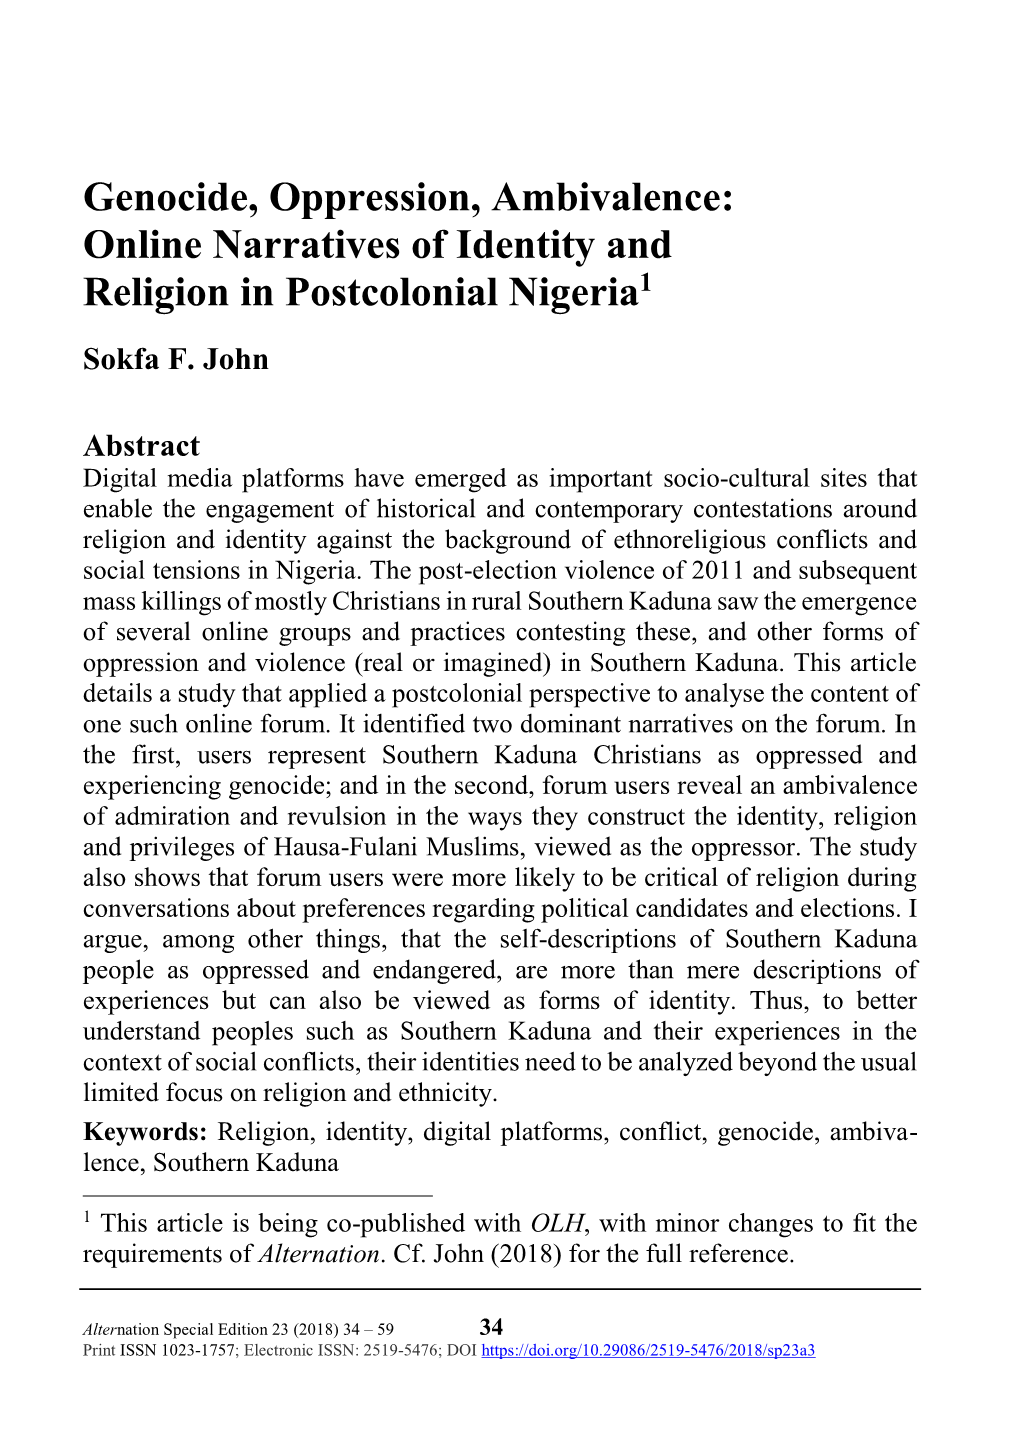 Online Narratives of Identity and Religion in Postcolonial Nigeria1